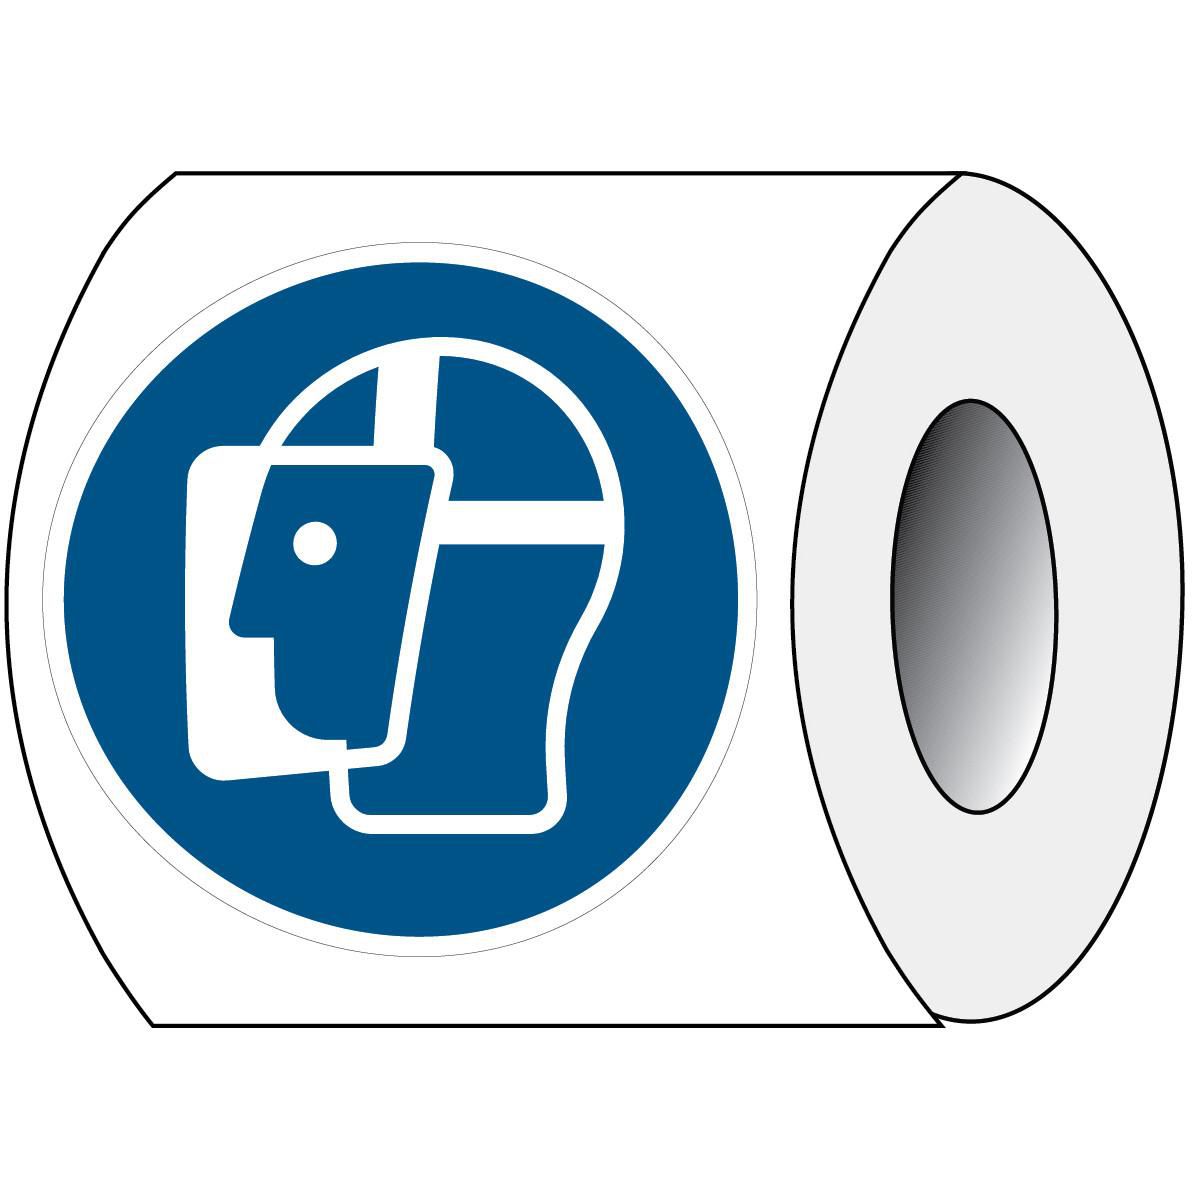 Brady PIC M013-DIA 025-PE-ROLL1 W128422495 ISO Safety Sign - Wear face 